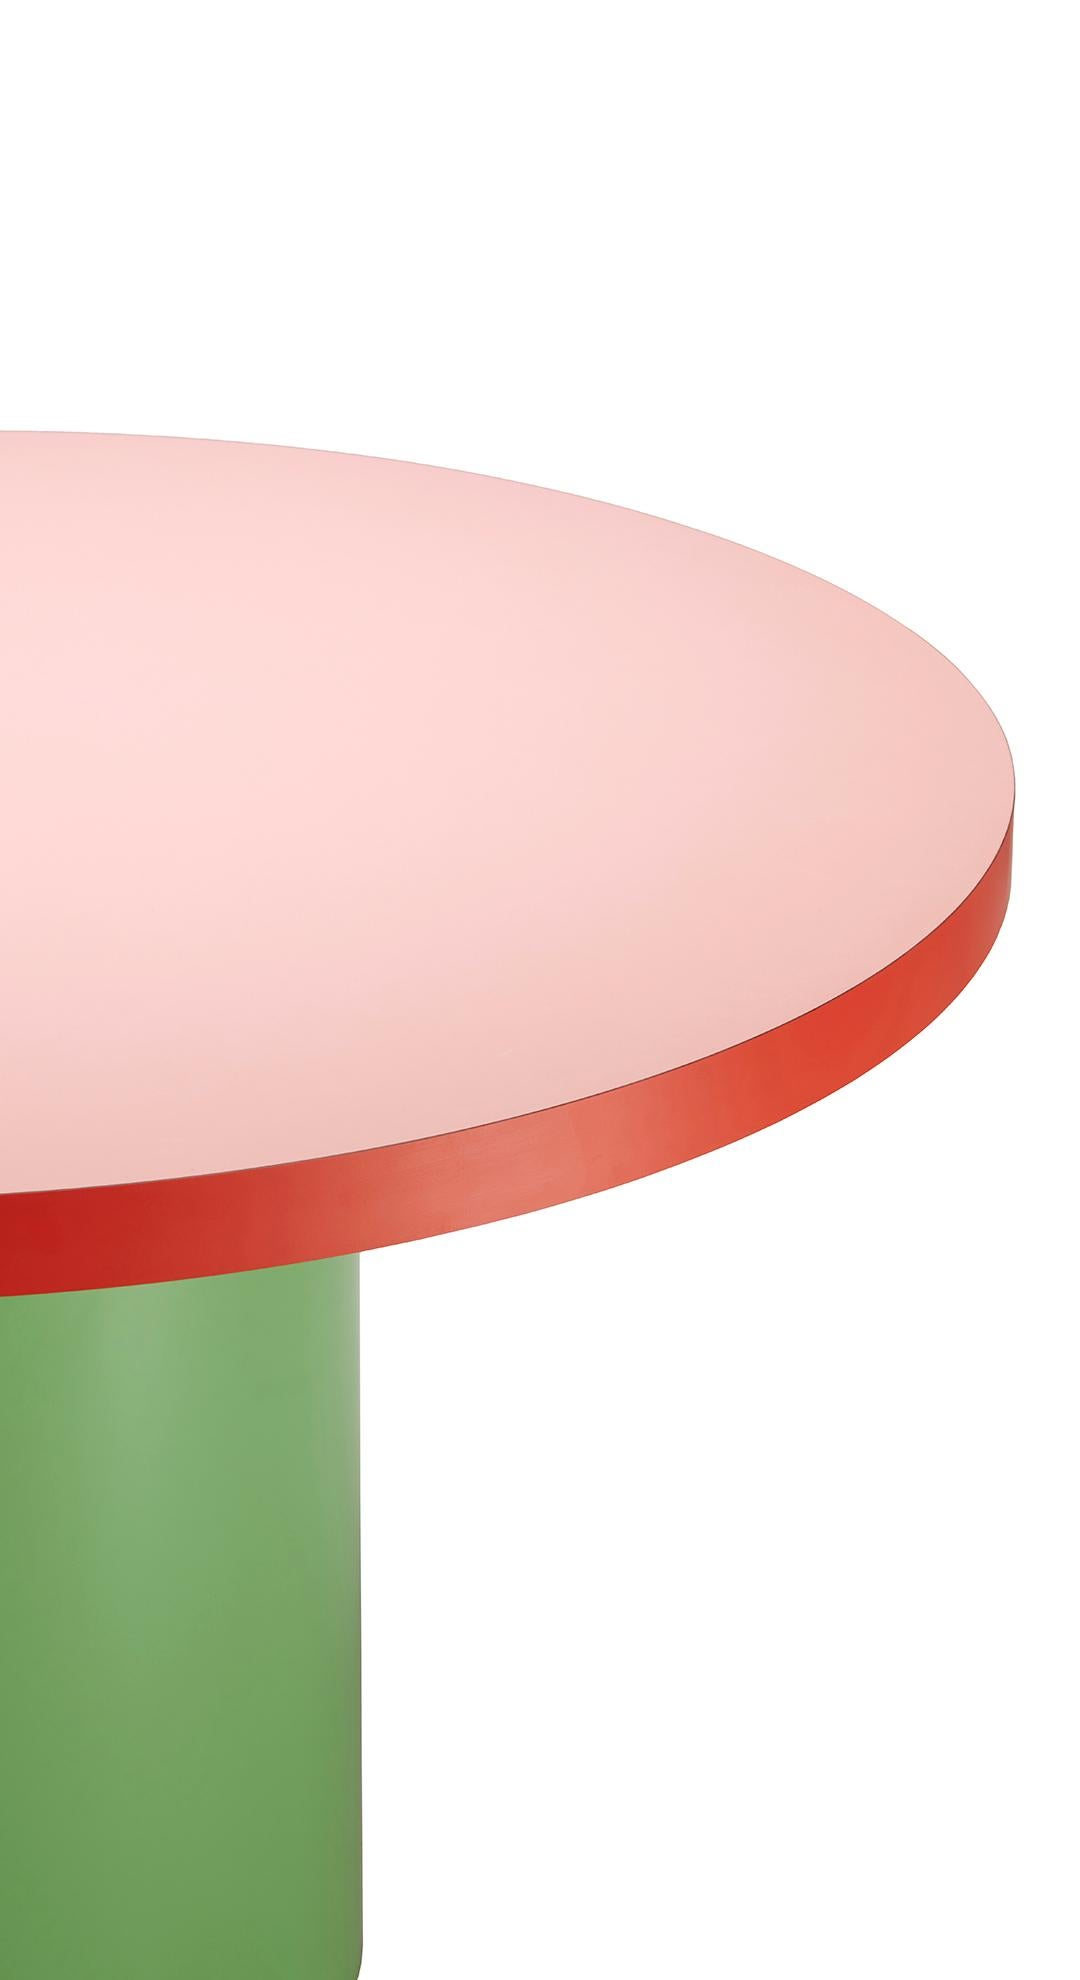 TAGADA´ Round Table by Stamuli, Green, Pink, Red In New Condition For Sale In Stockholm, SE